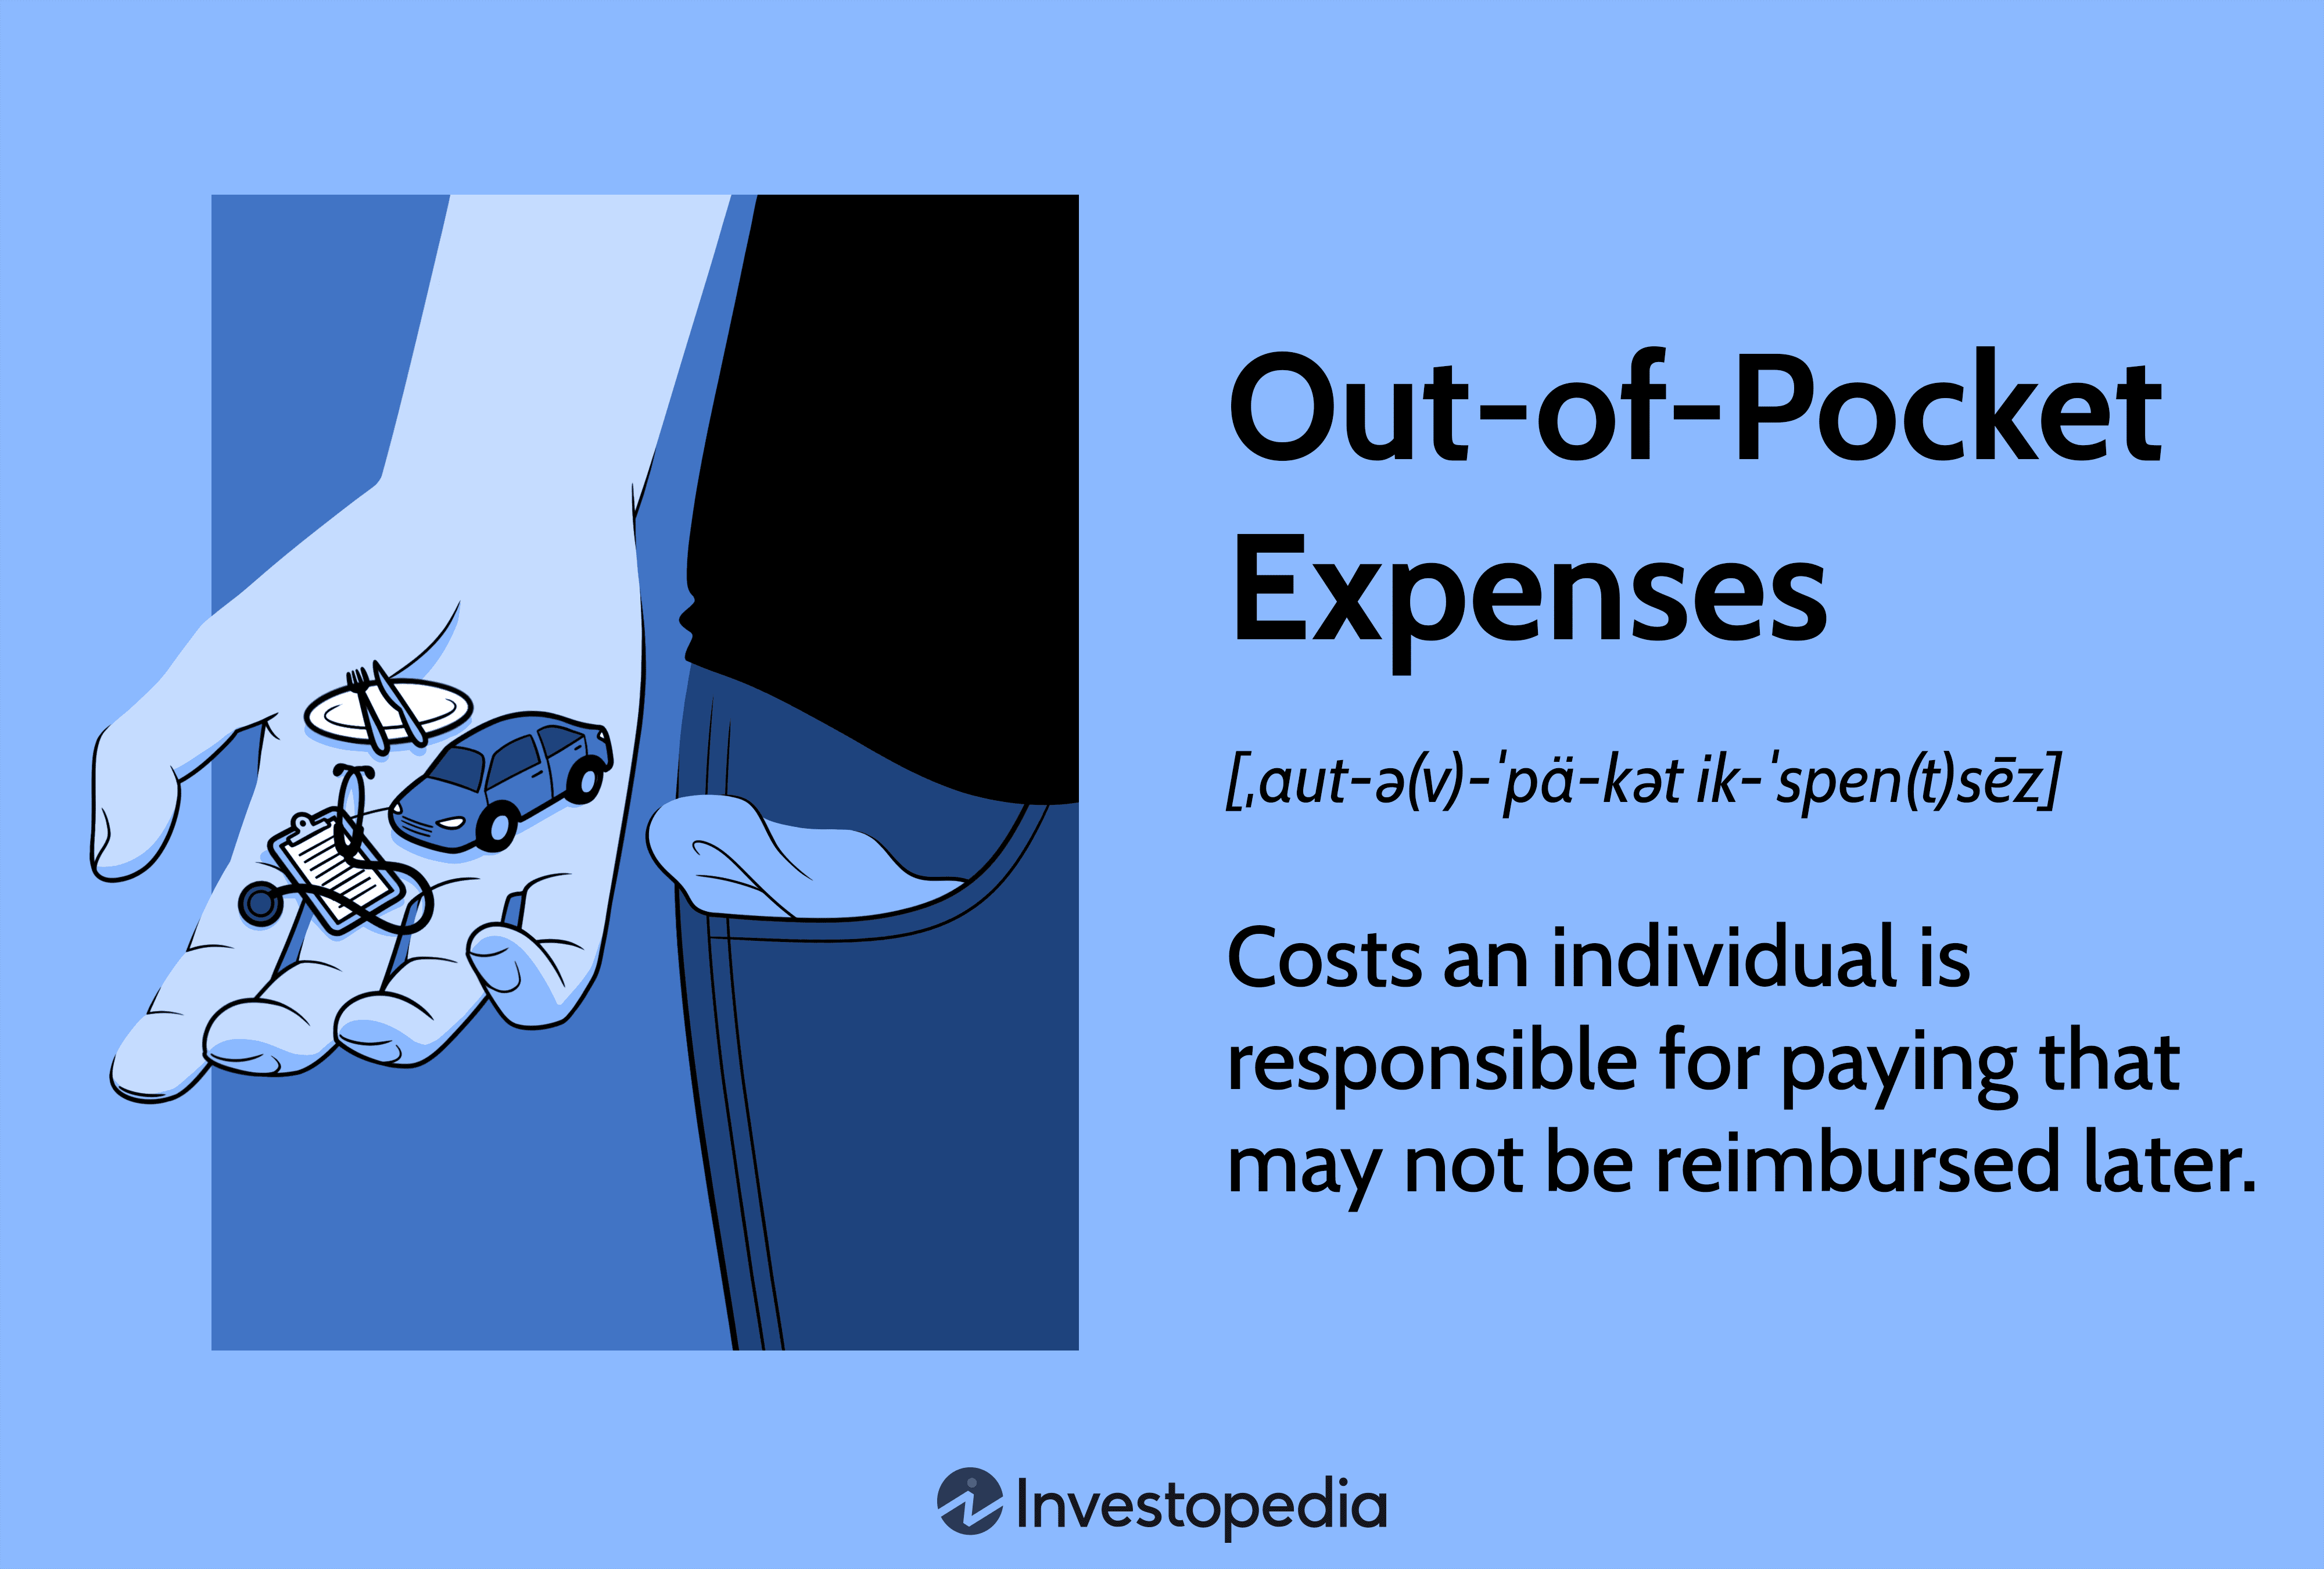 Out-of-Pocket Expenses: Costs an individual is responsible for paying that may not be reimbursed later.